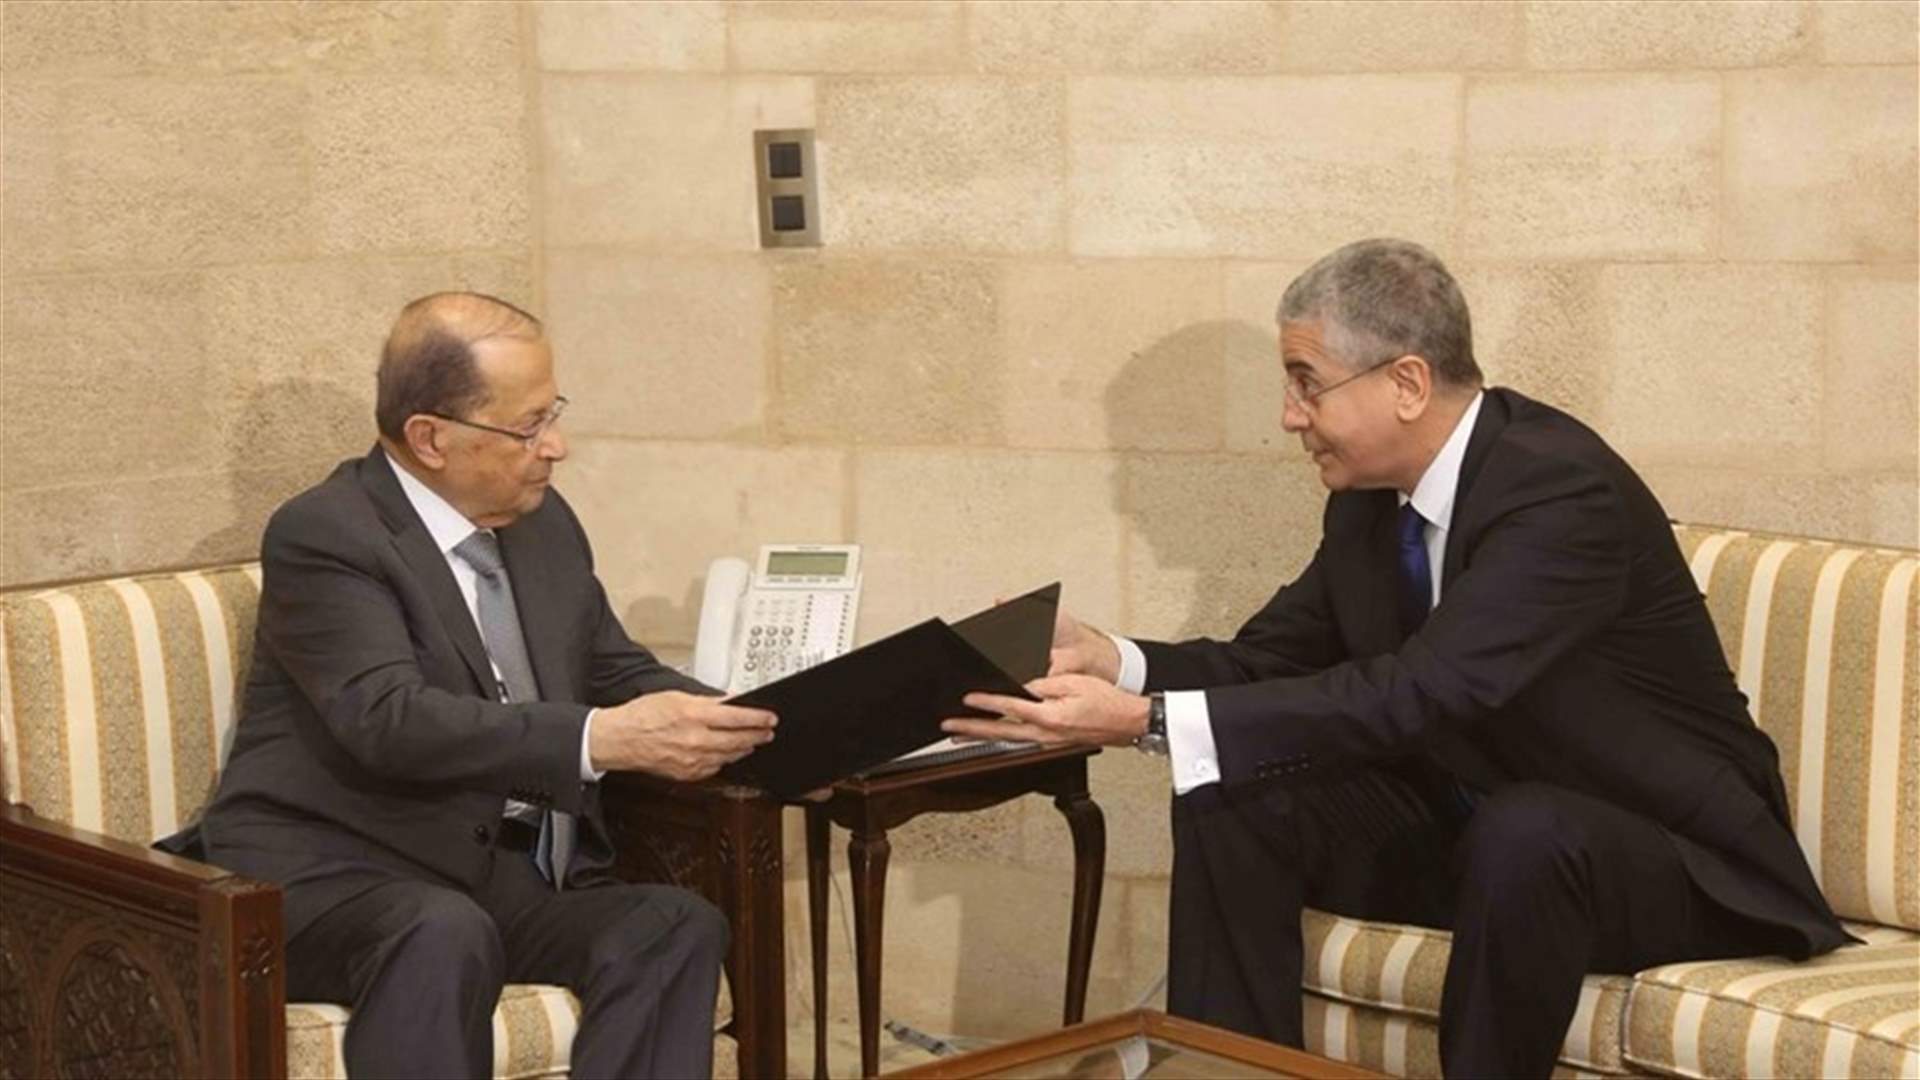 Aoun receives letter of support and confidence from World Bank president